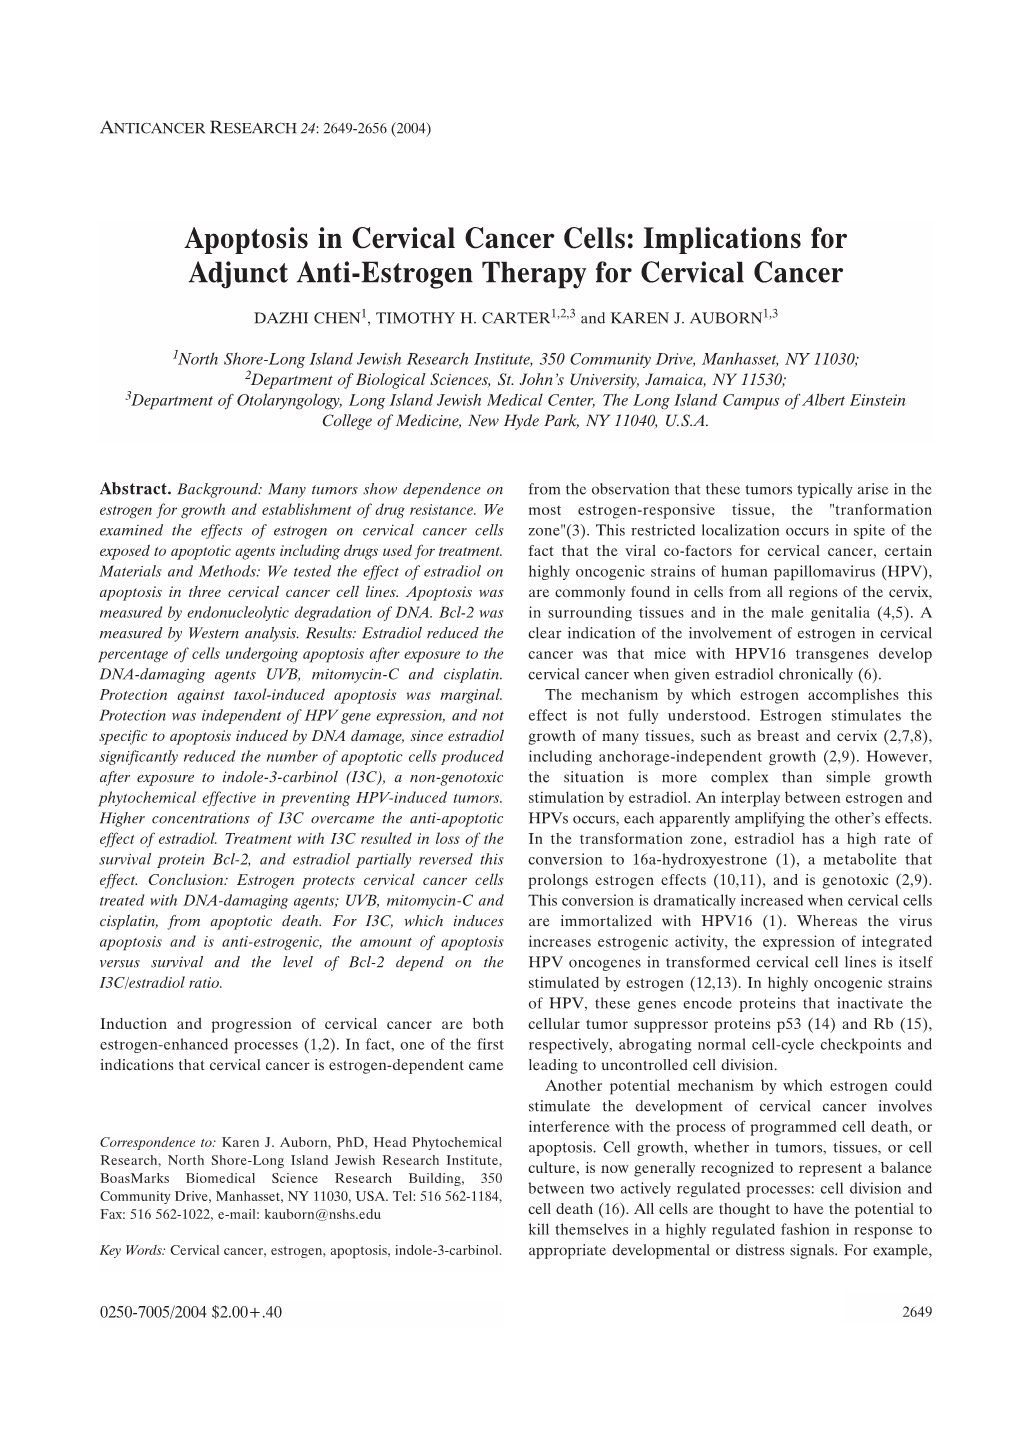 Implications for Adjunct Anti-Estrogen Therapy for Cervical Cancer